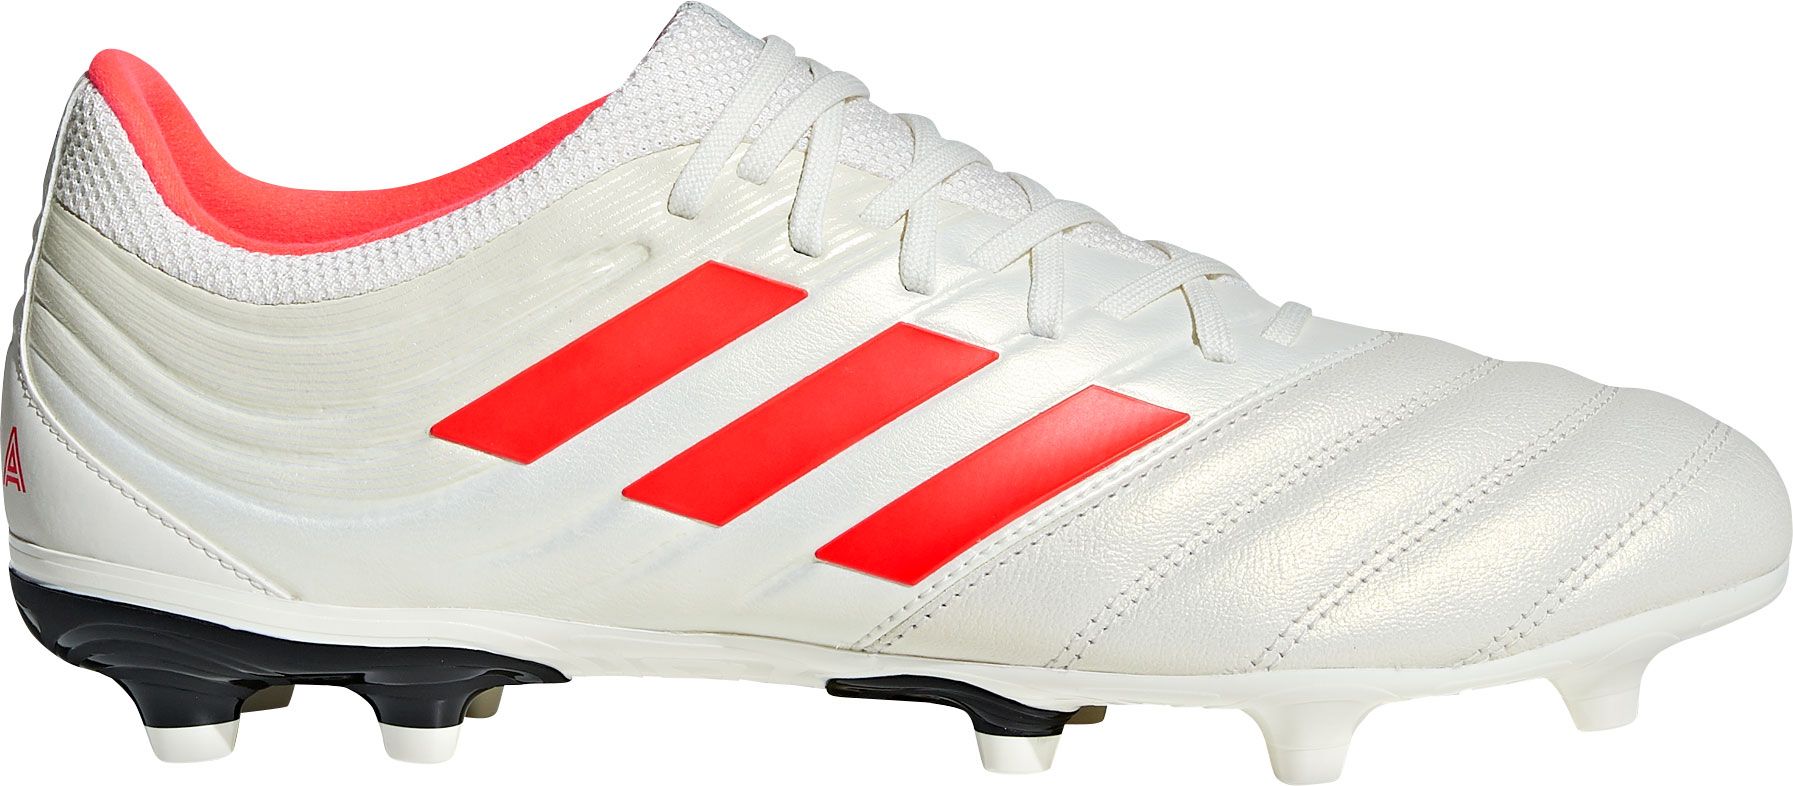 adidas soccer boots copa